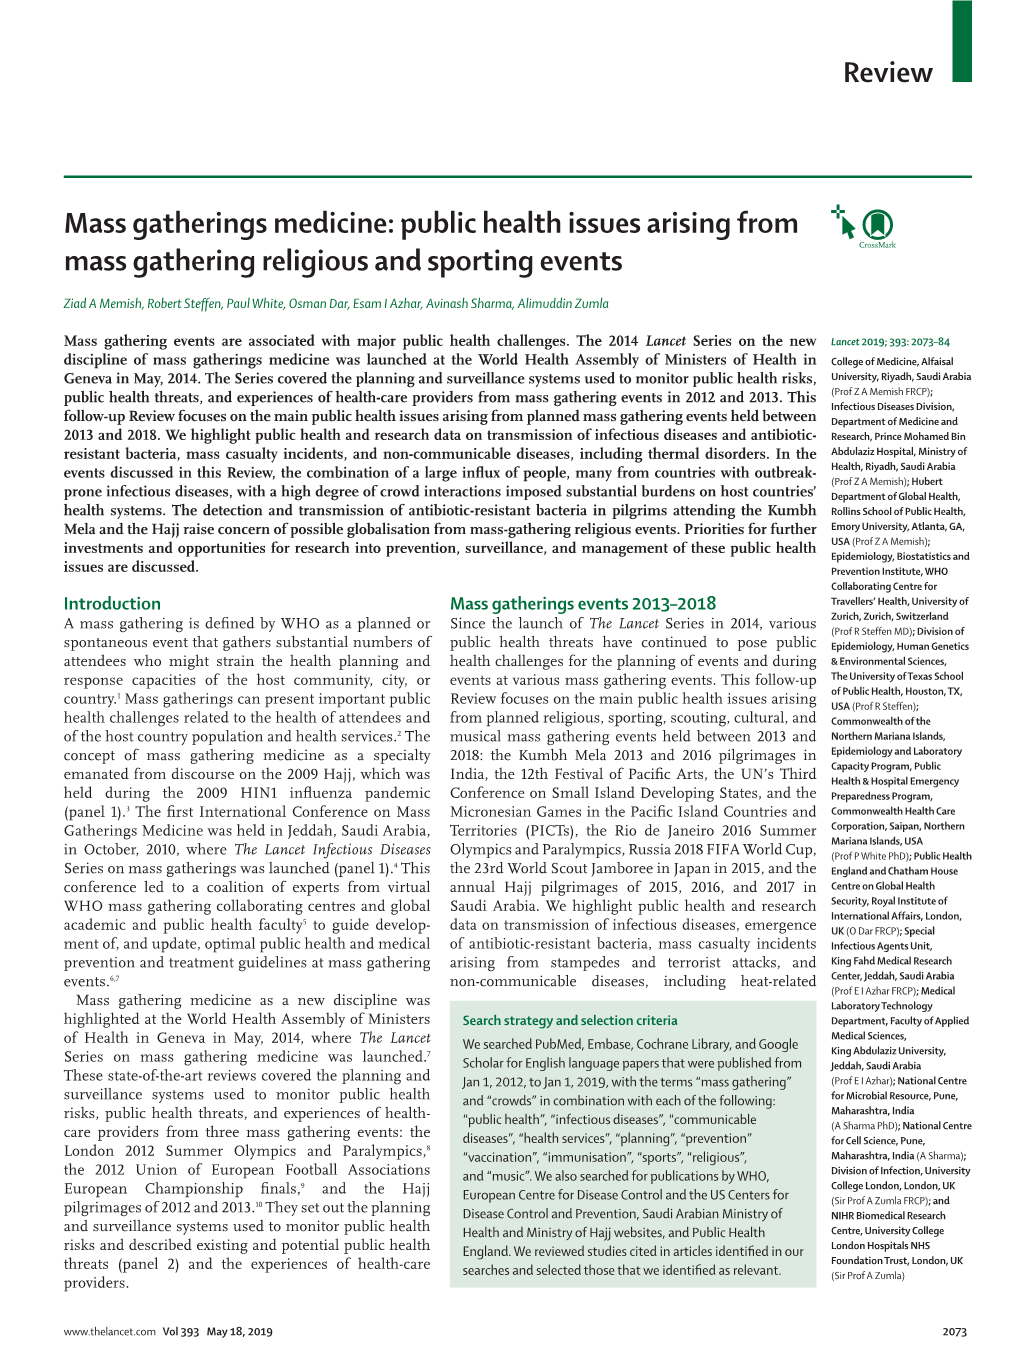 Mass Gatherings Medicine: Public Health Issues Arising from Mass Gathering Religious and Sporting Events